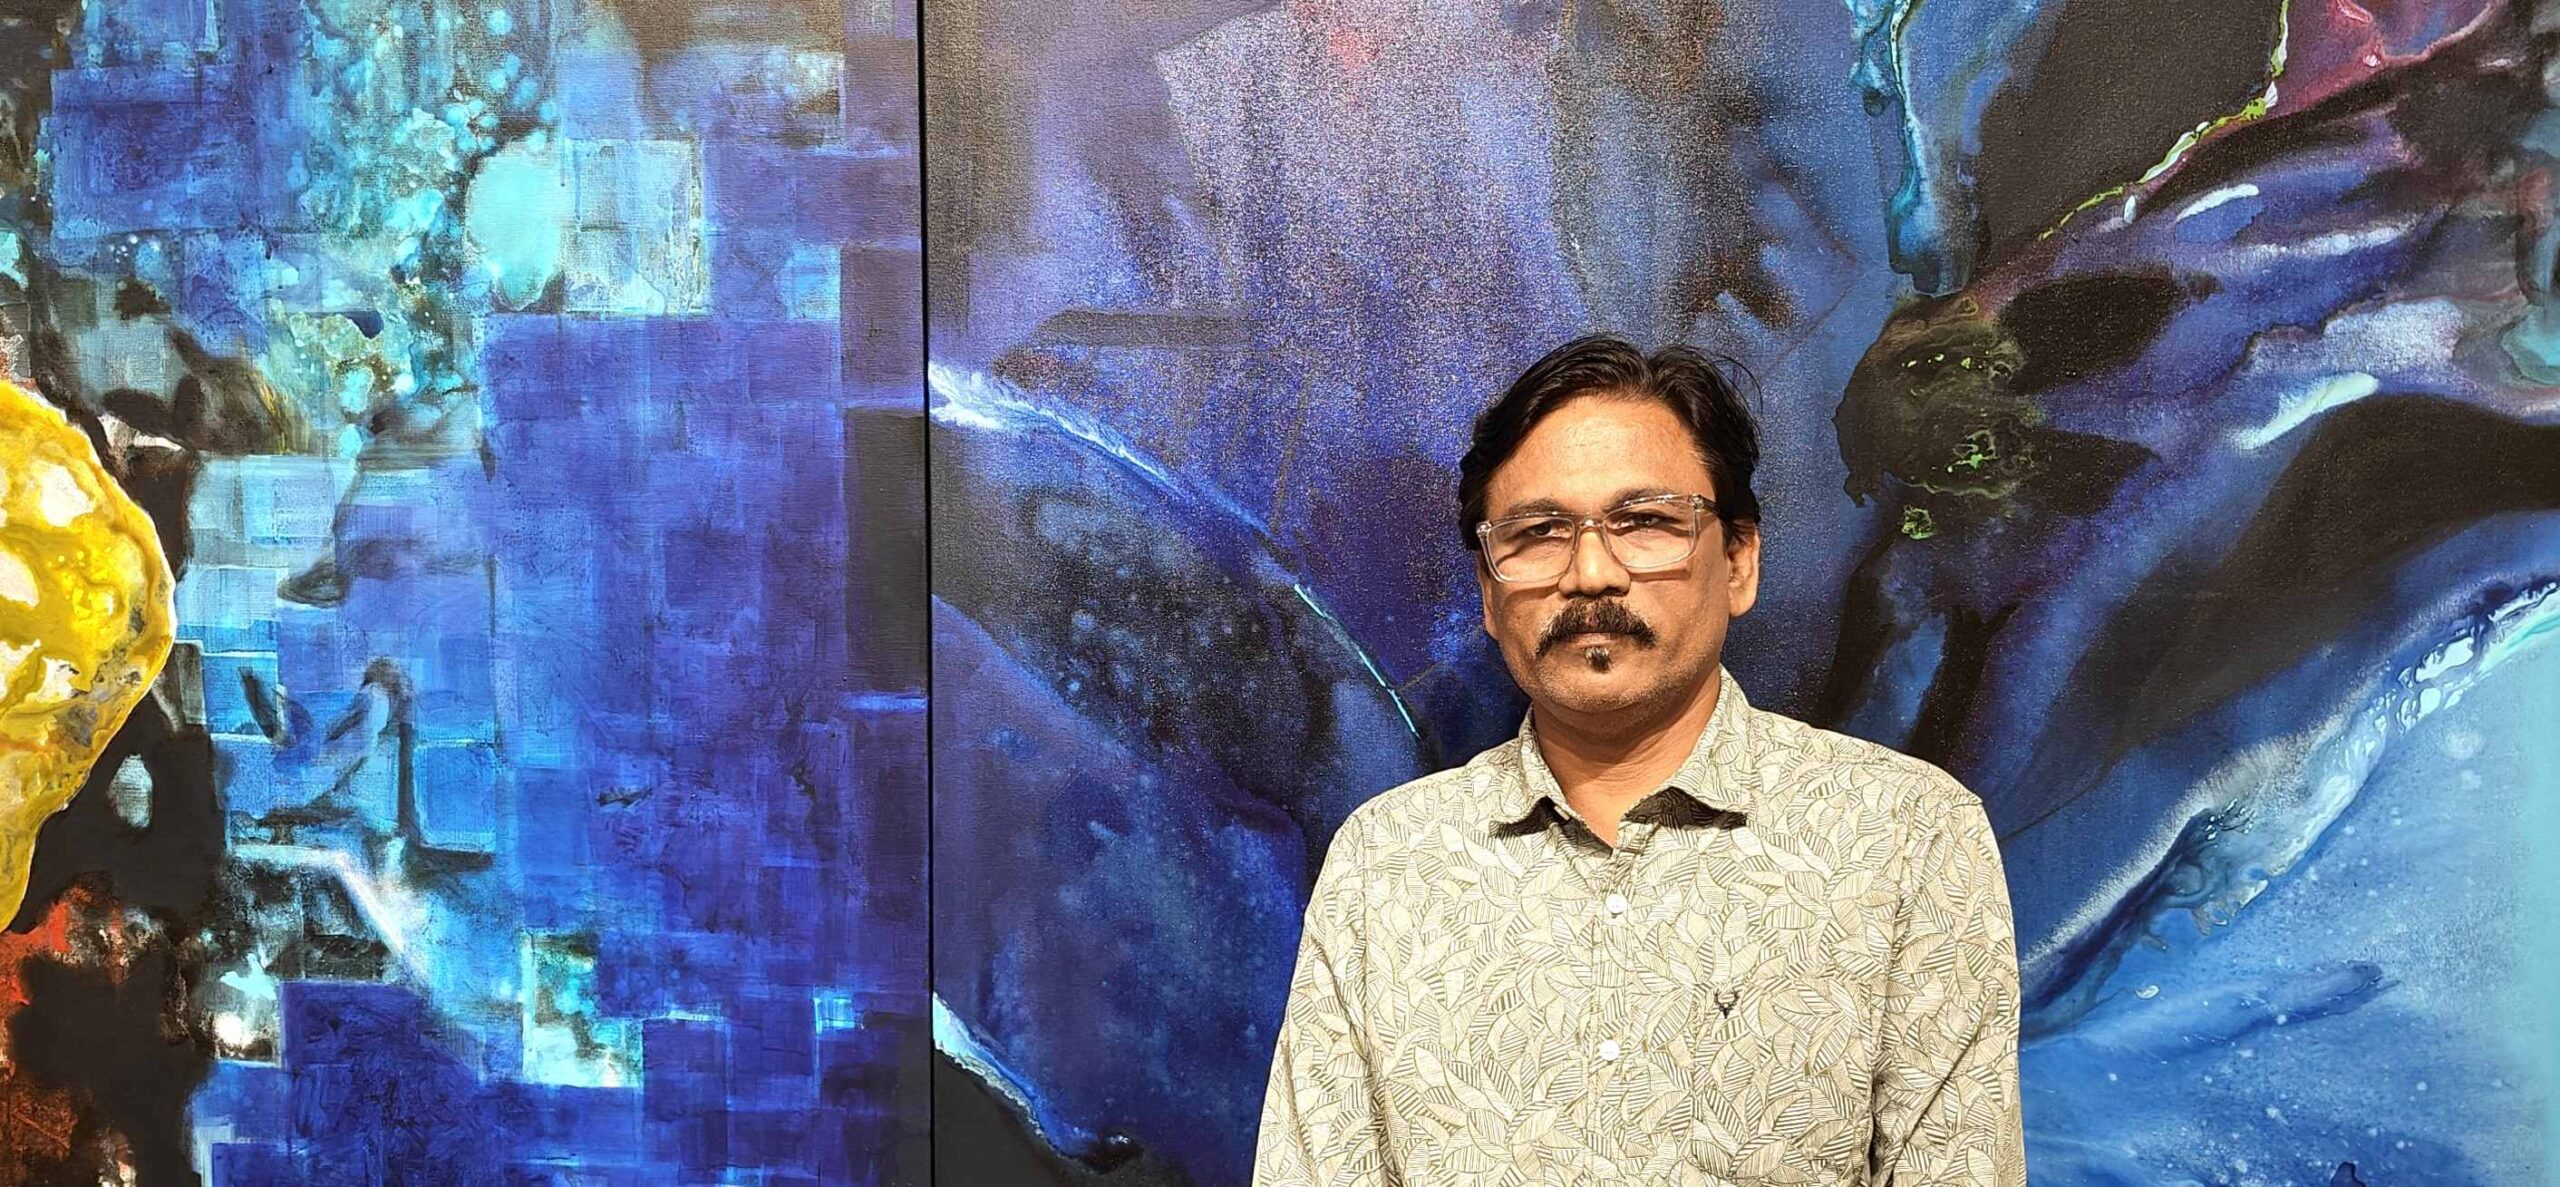 Earth Art in the Contemporary Art World: An Exhibition by Mr. Ajit D Chaudhary